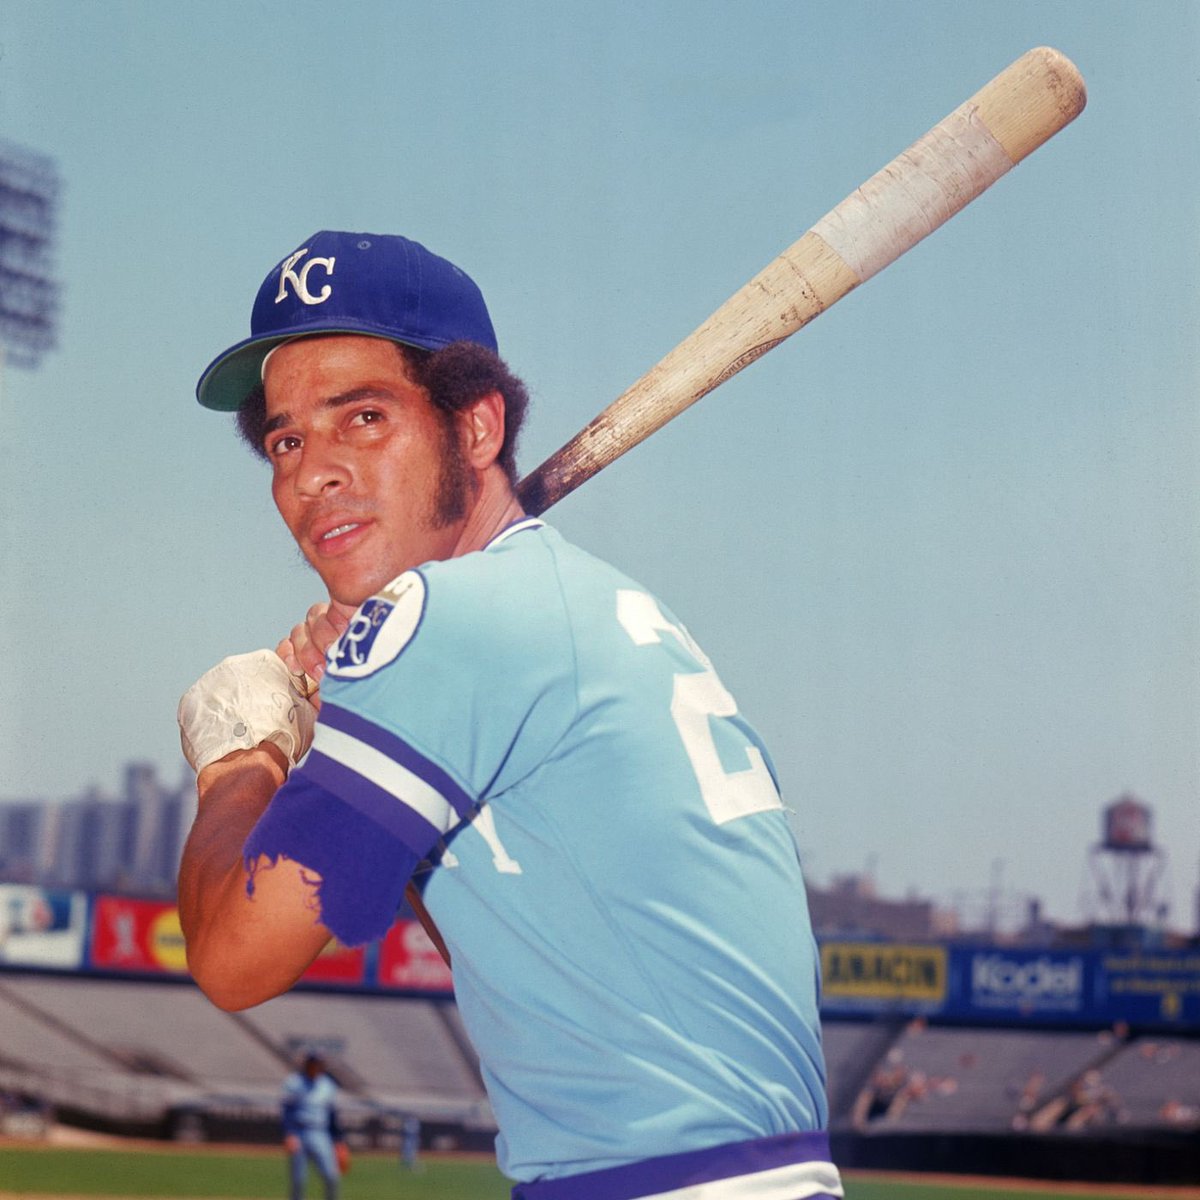 Happy Birthday Amos Otis, out of Mobile, Alabama; 17 year @MLB career, .277 lifetime average, 2,020 hits, 193 HR’s, 1,007 RBI; 5X All Star, 3X Gold Glove, AL Stolen Base Leader 1971, @Royals Hall of Fame, Member @ASHOF Member @MoSportsHall ; 77 Today…..